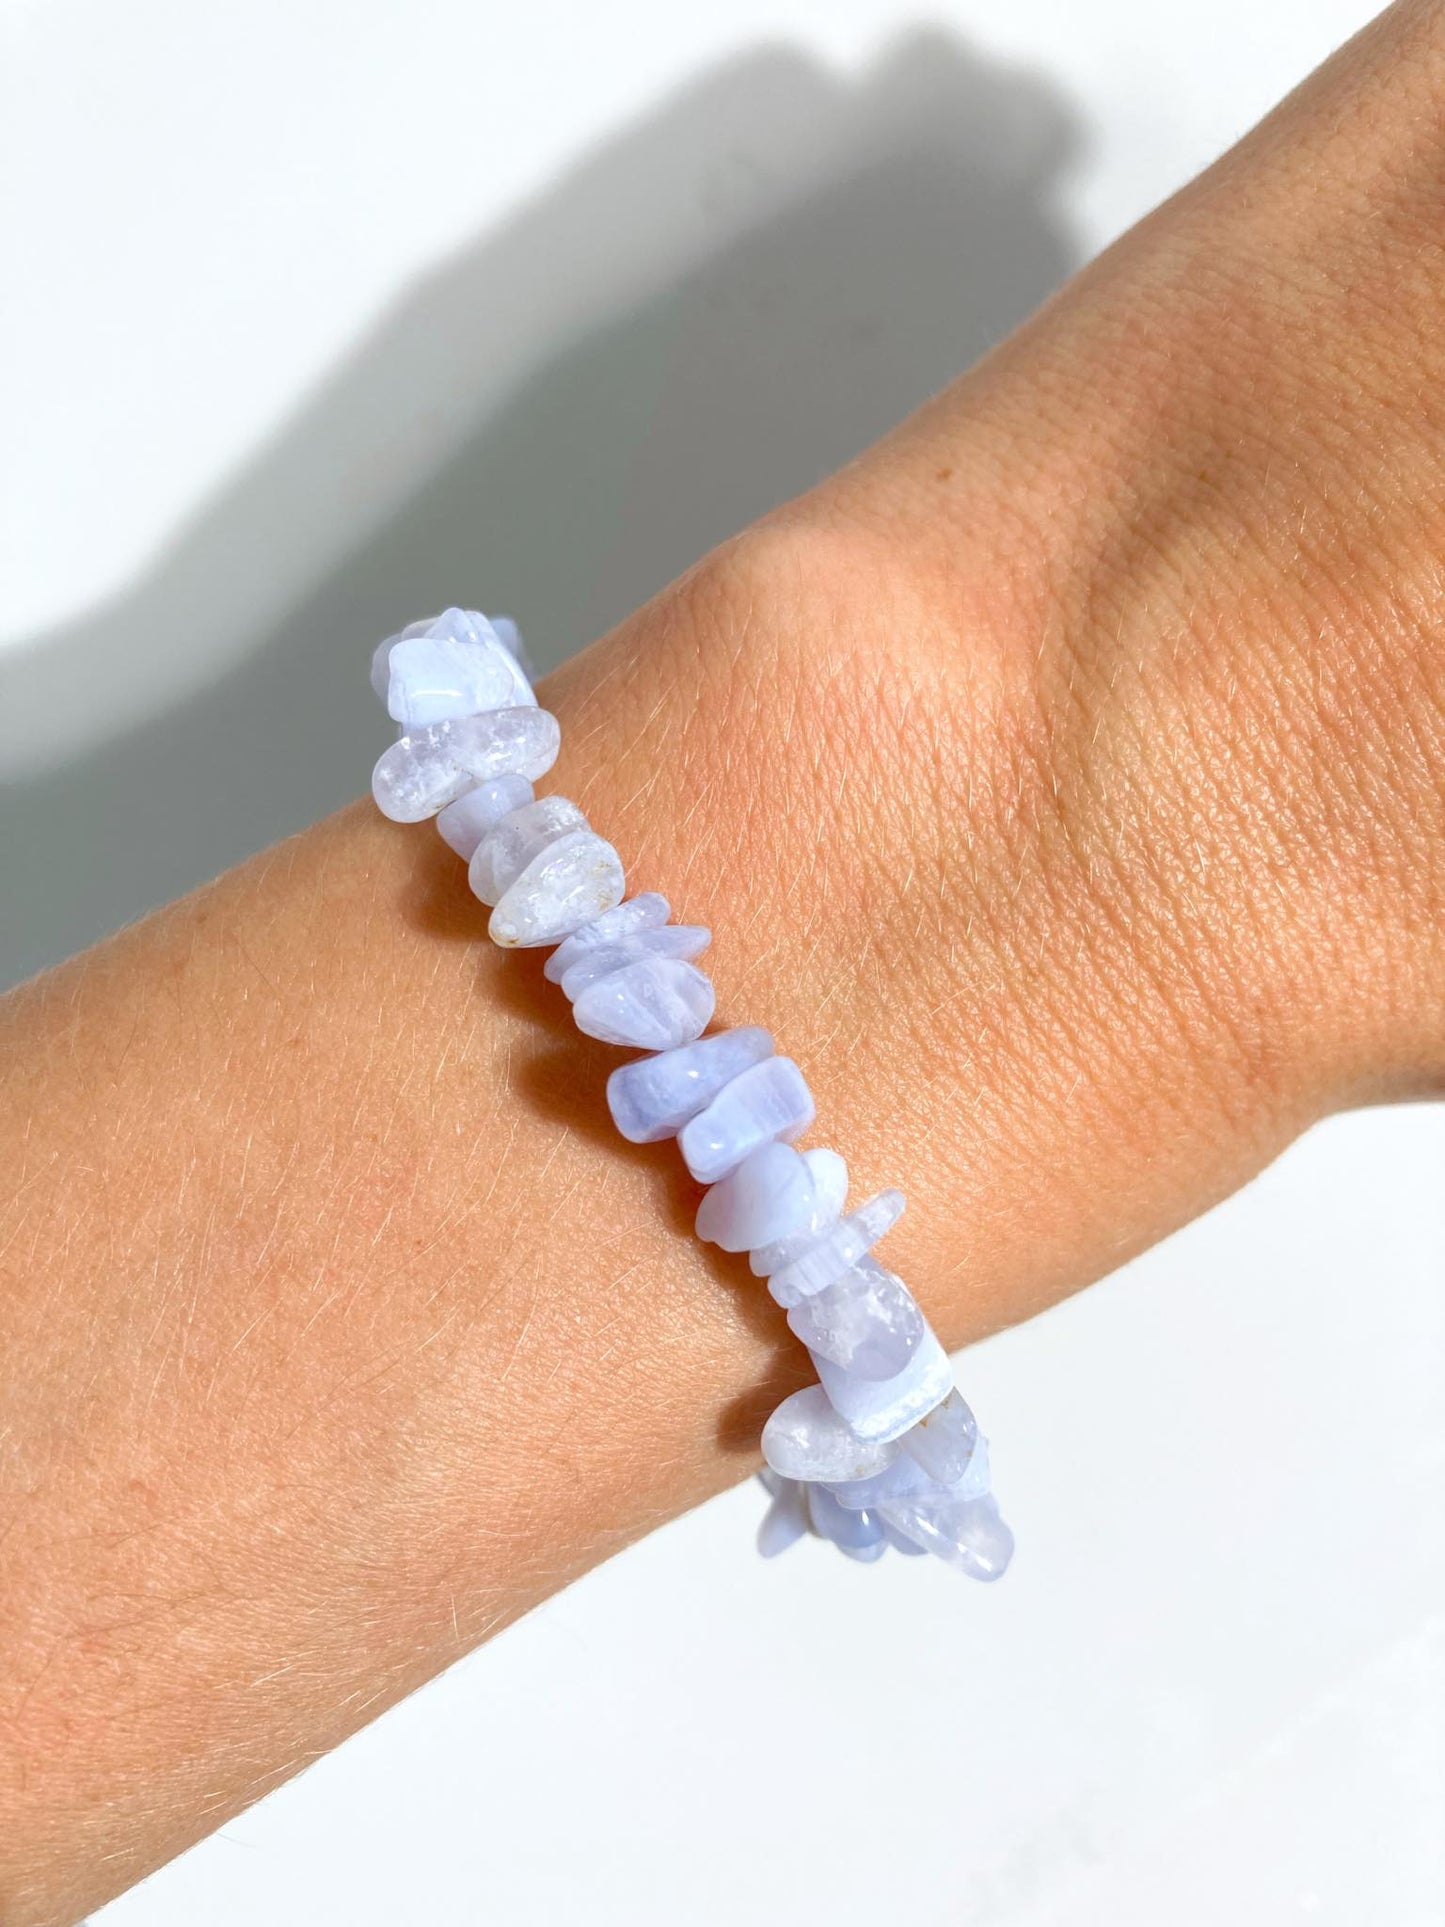 Blauer Chalcedon Chips Armband . Blue Lace Agate Chips Bracelet - Common Quality